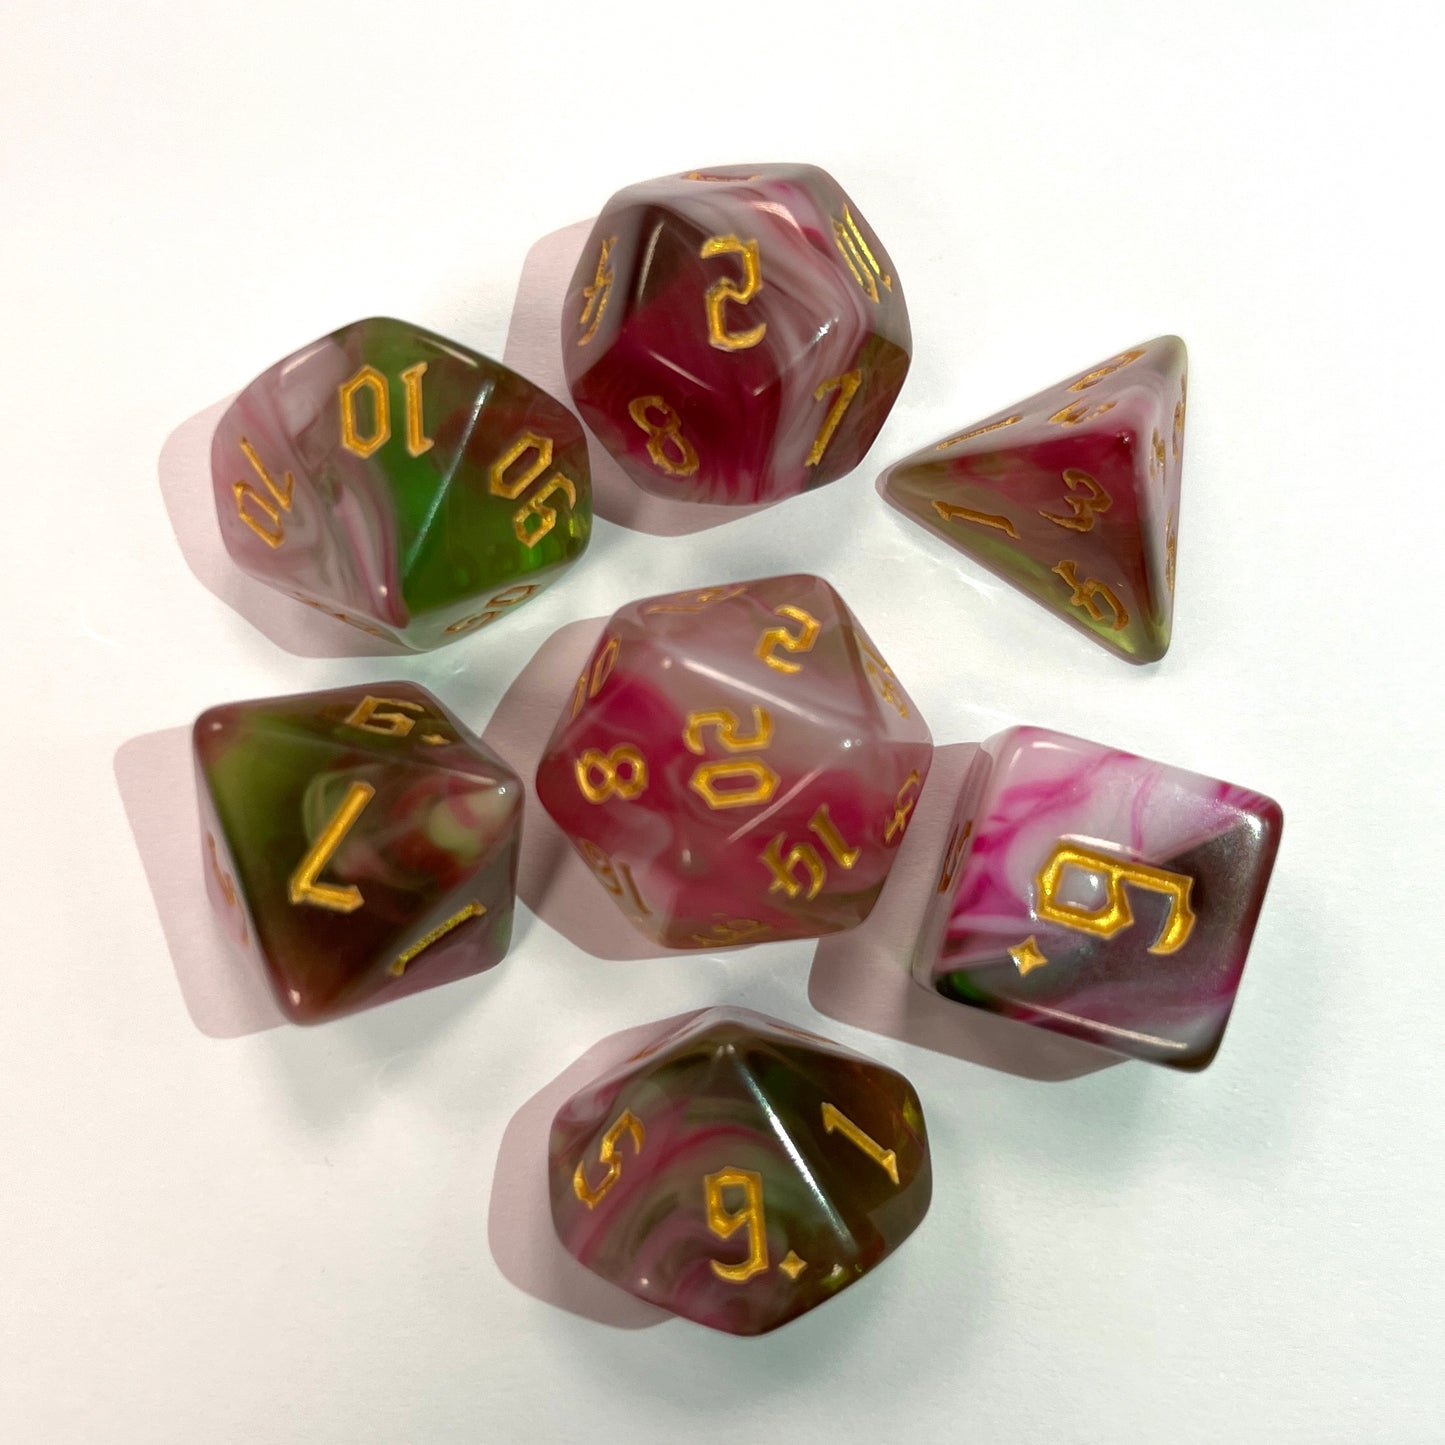 FeyWild DND dice set for RPG, DND, role playing games and dice goblin, critical critter collectors, uk dice store